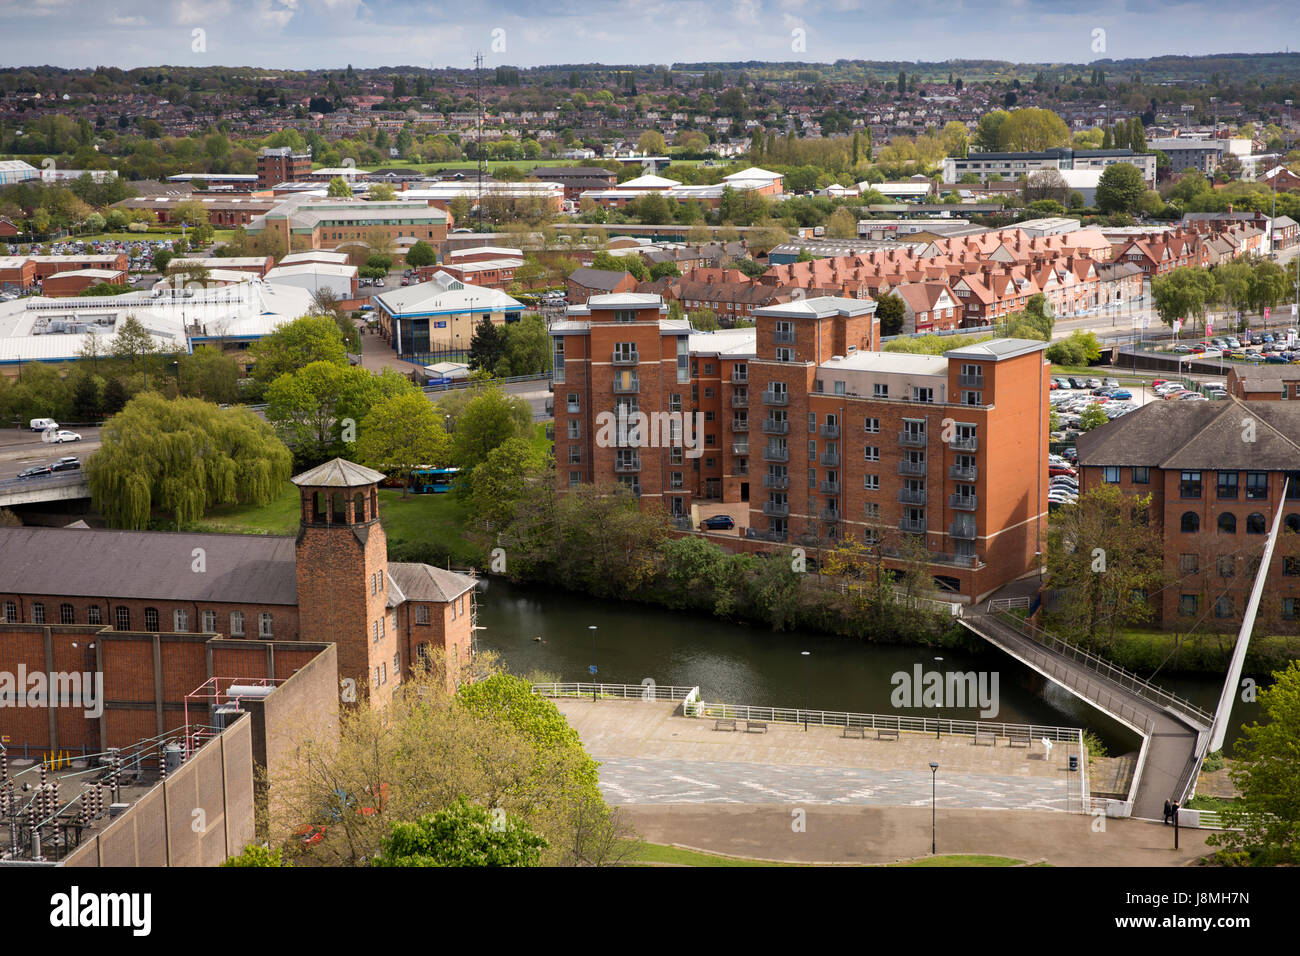 UK, England, Derbyshire, Derby, Old Silk Mill and Stuart Street apartments and footbridge across River Derwent, elevated view from Cathedral Tower Stock Photo